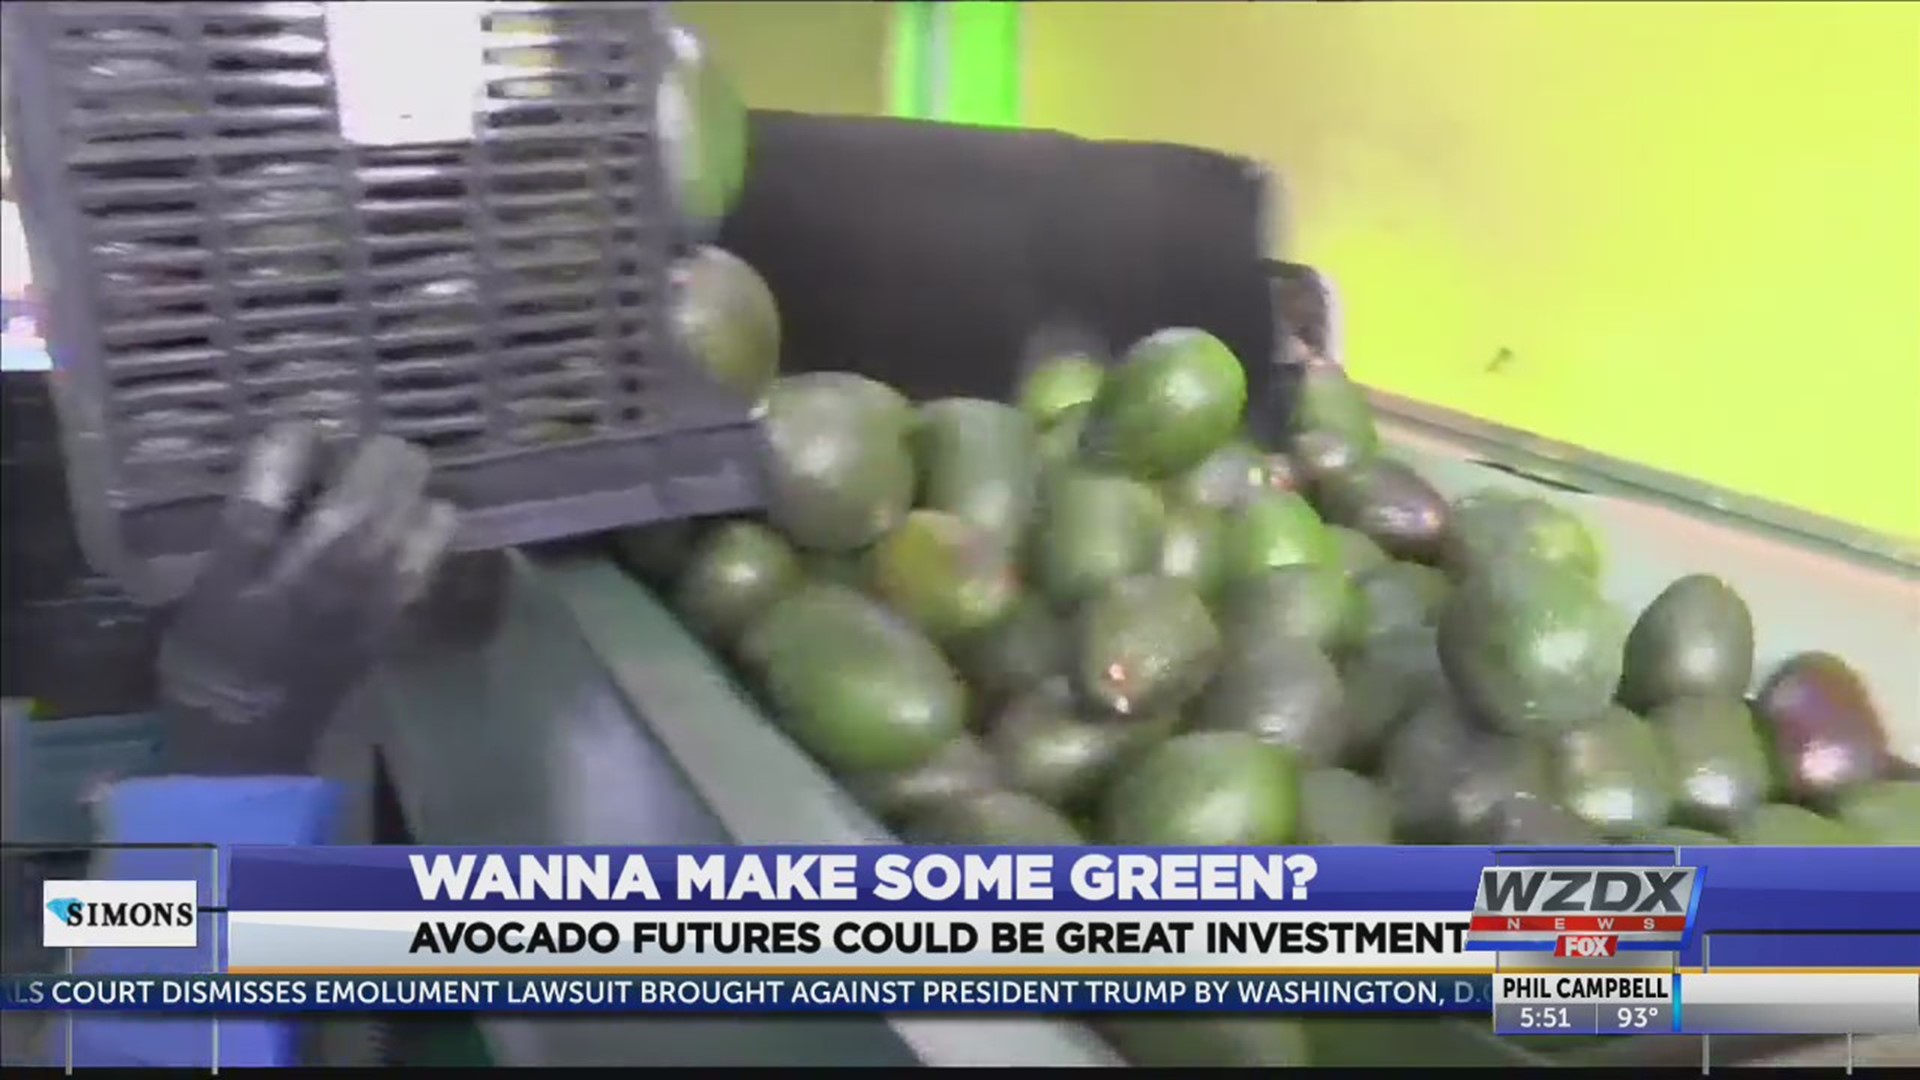 If you want to invest in something that is exploding in value, forget Wall Street...look at avocado futures.